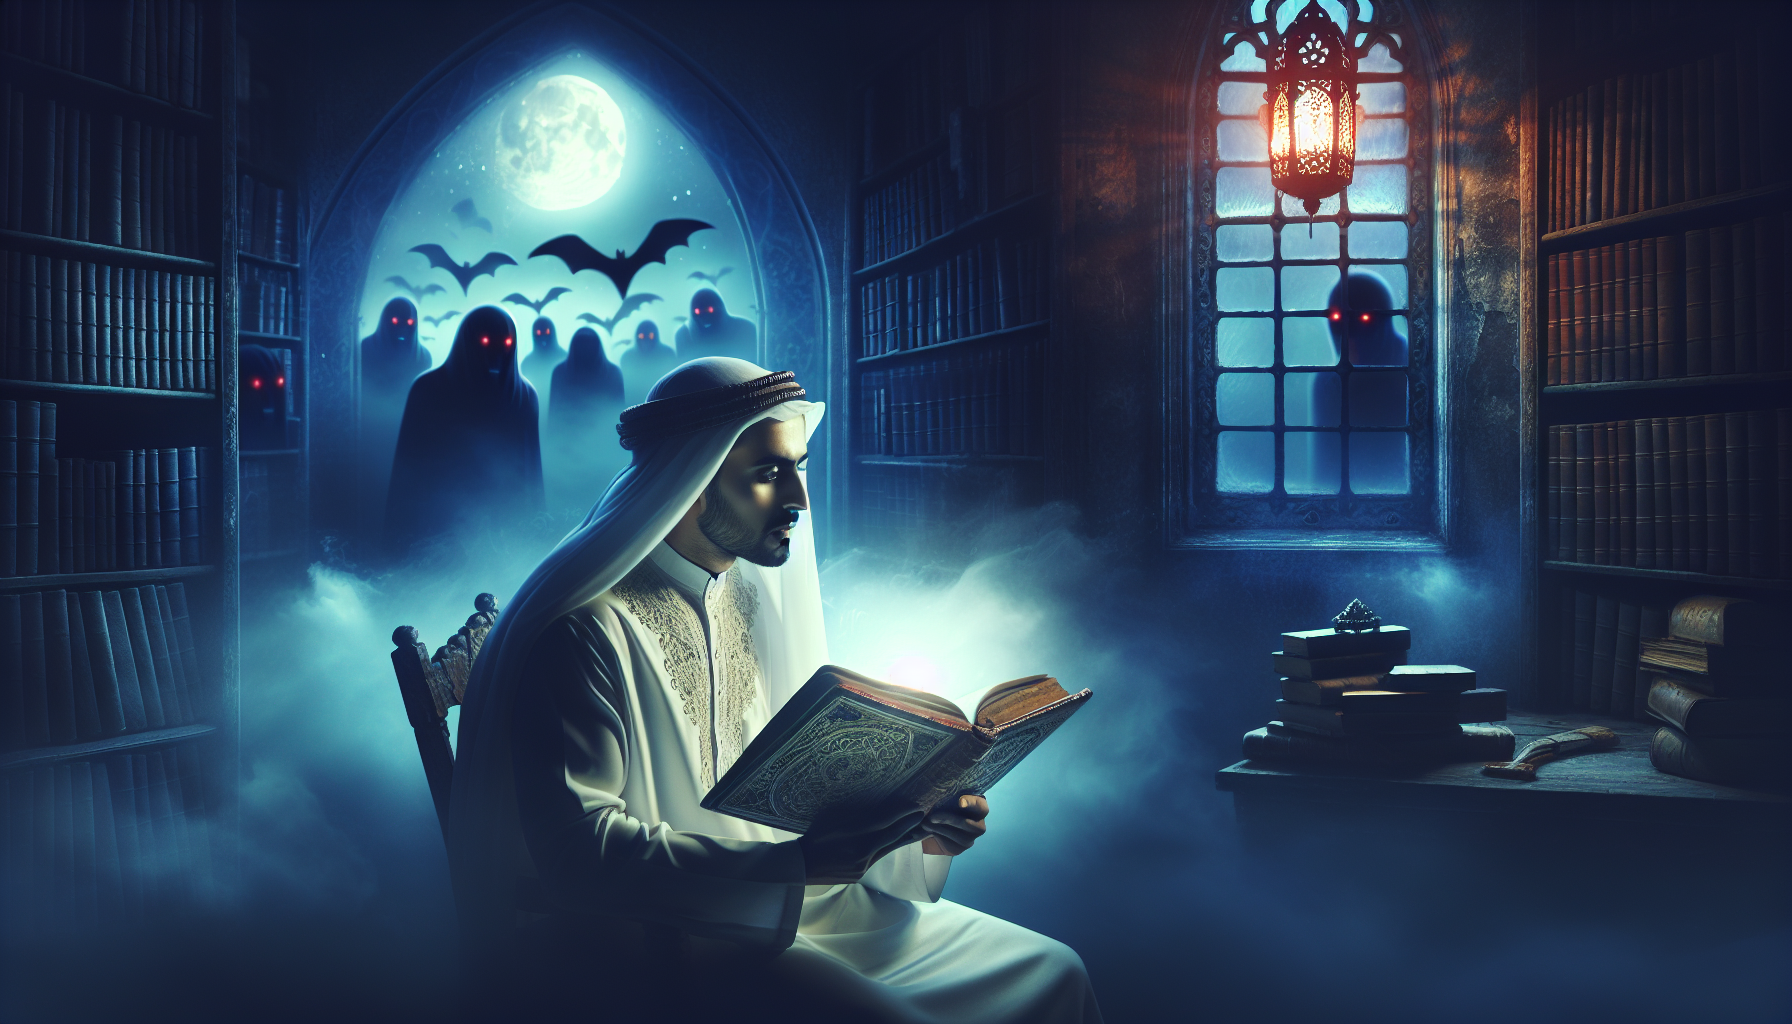 A surreal dreamscape where a person is sitting in a misty, Gothic library, reading a vintage book about vampires under the soft glow of a moonlit window, with shadowy vampire-like figures lurking subt